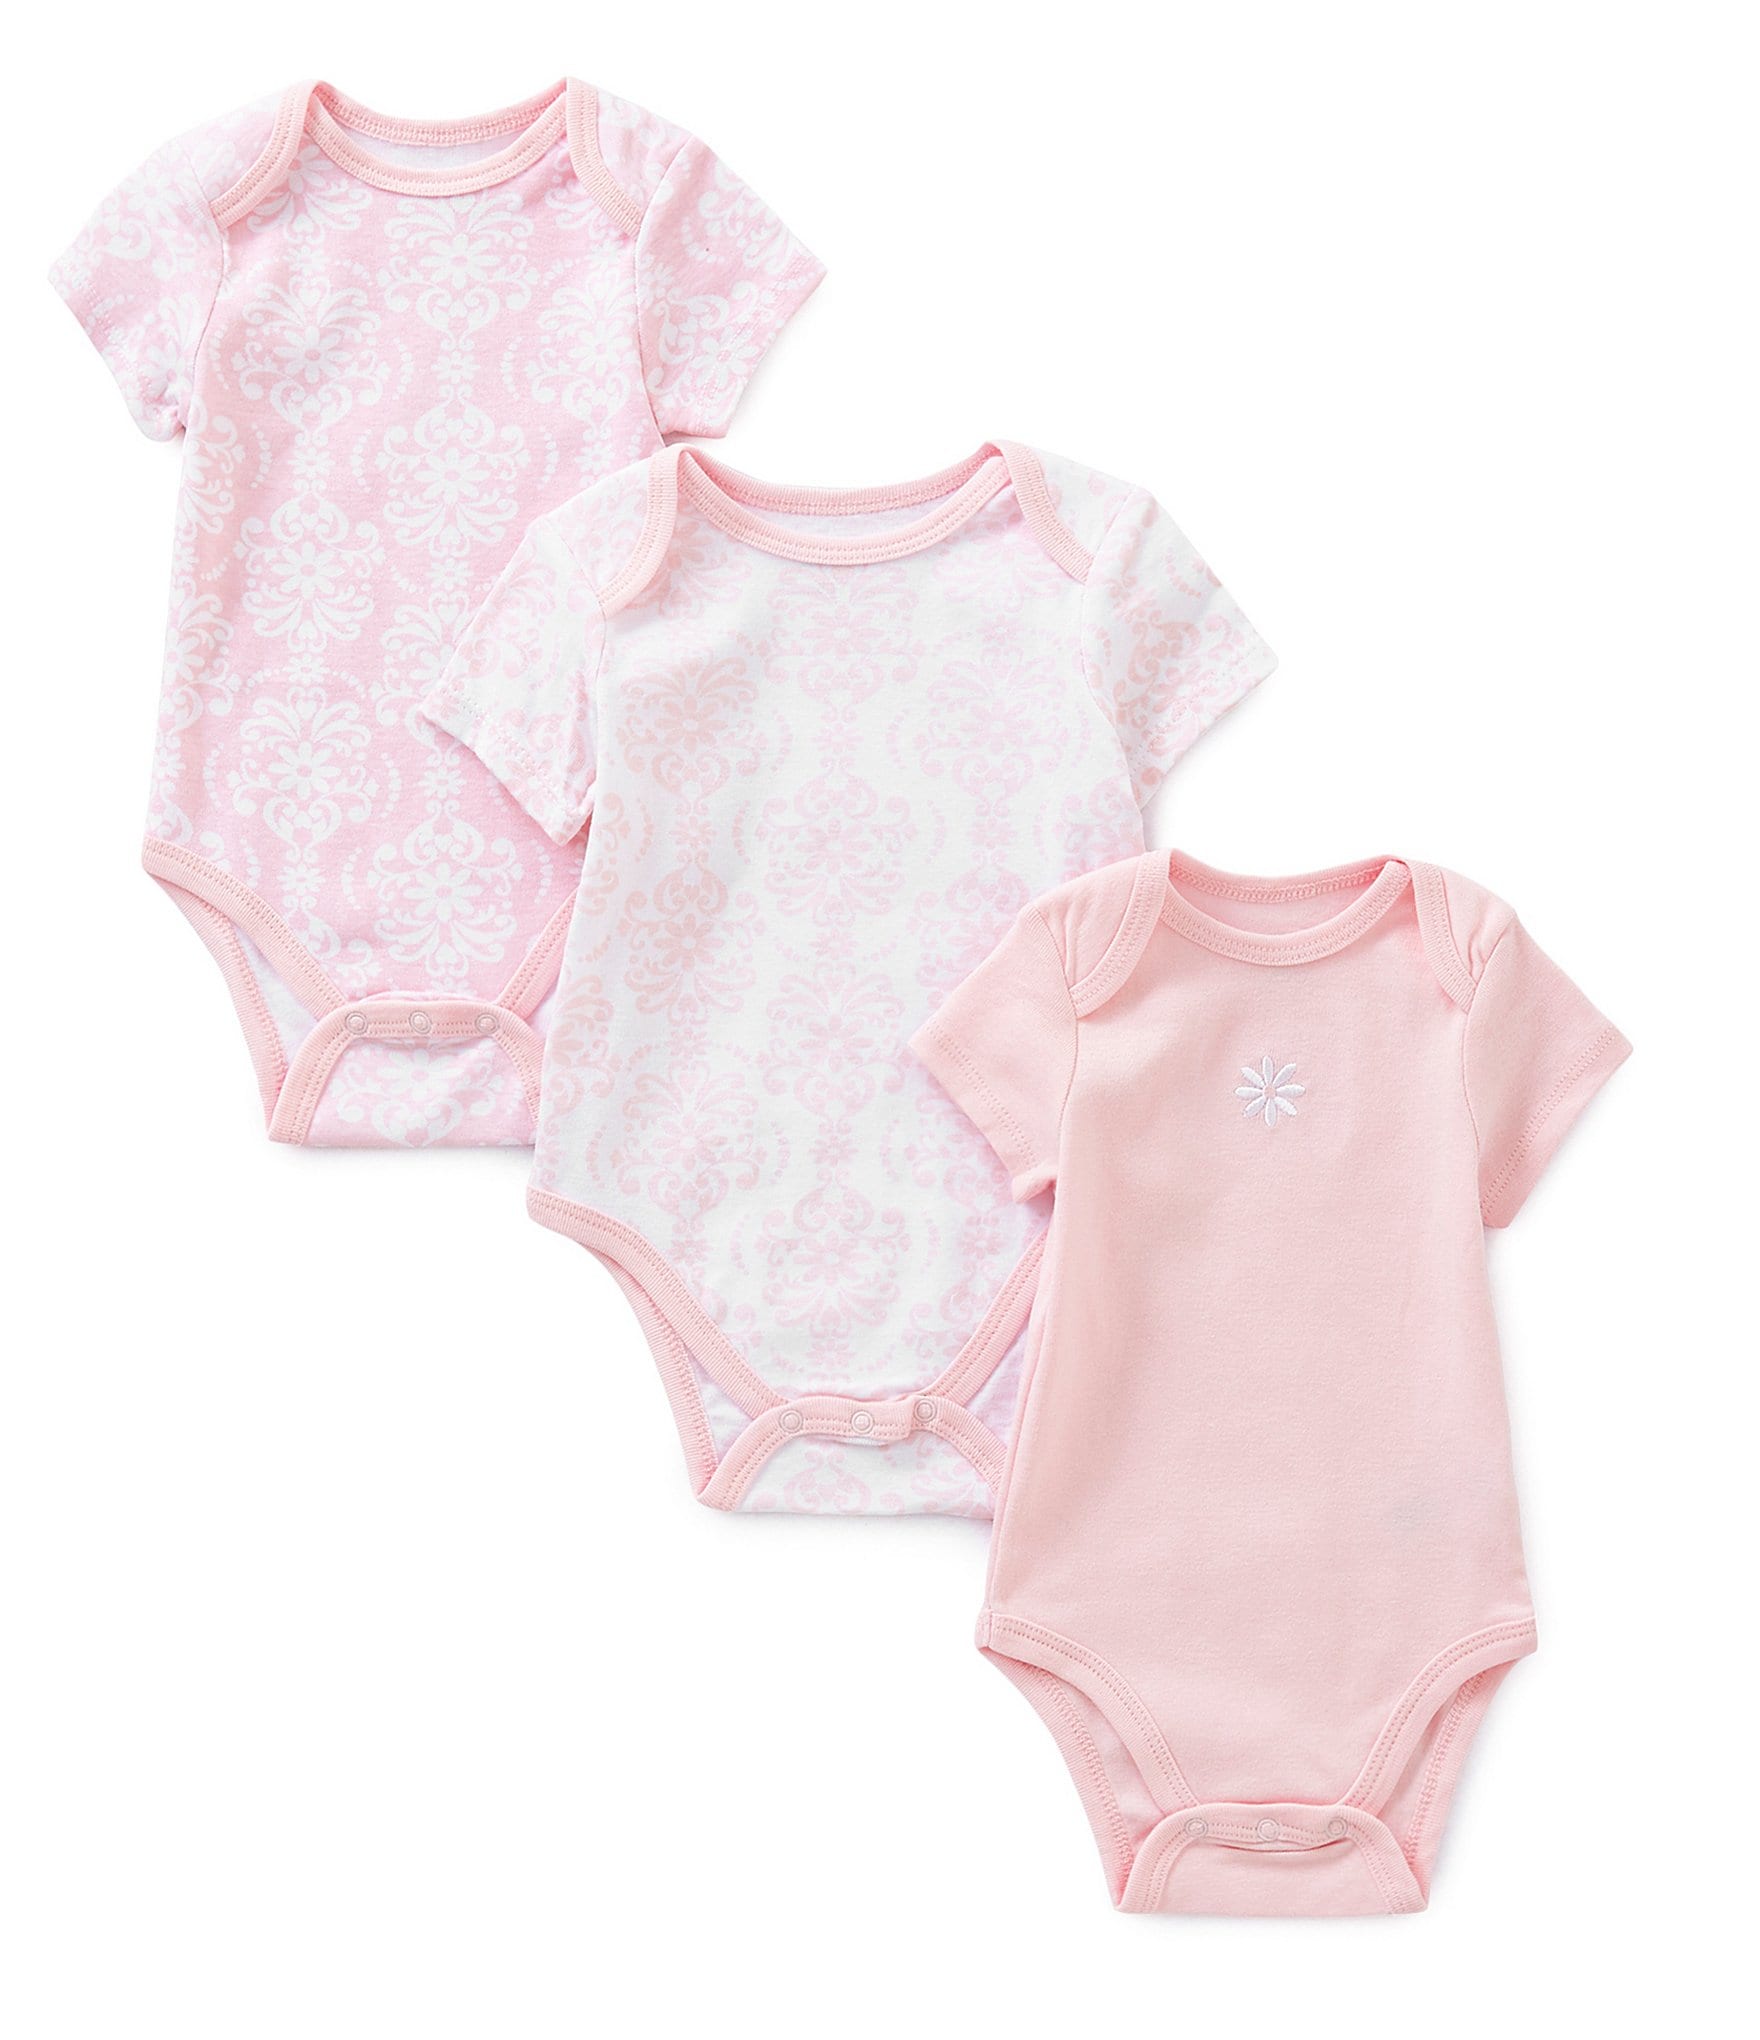 Pink Bodysuits For Women